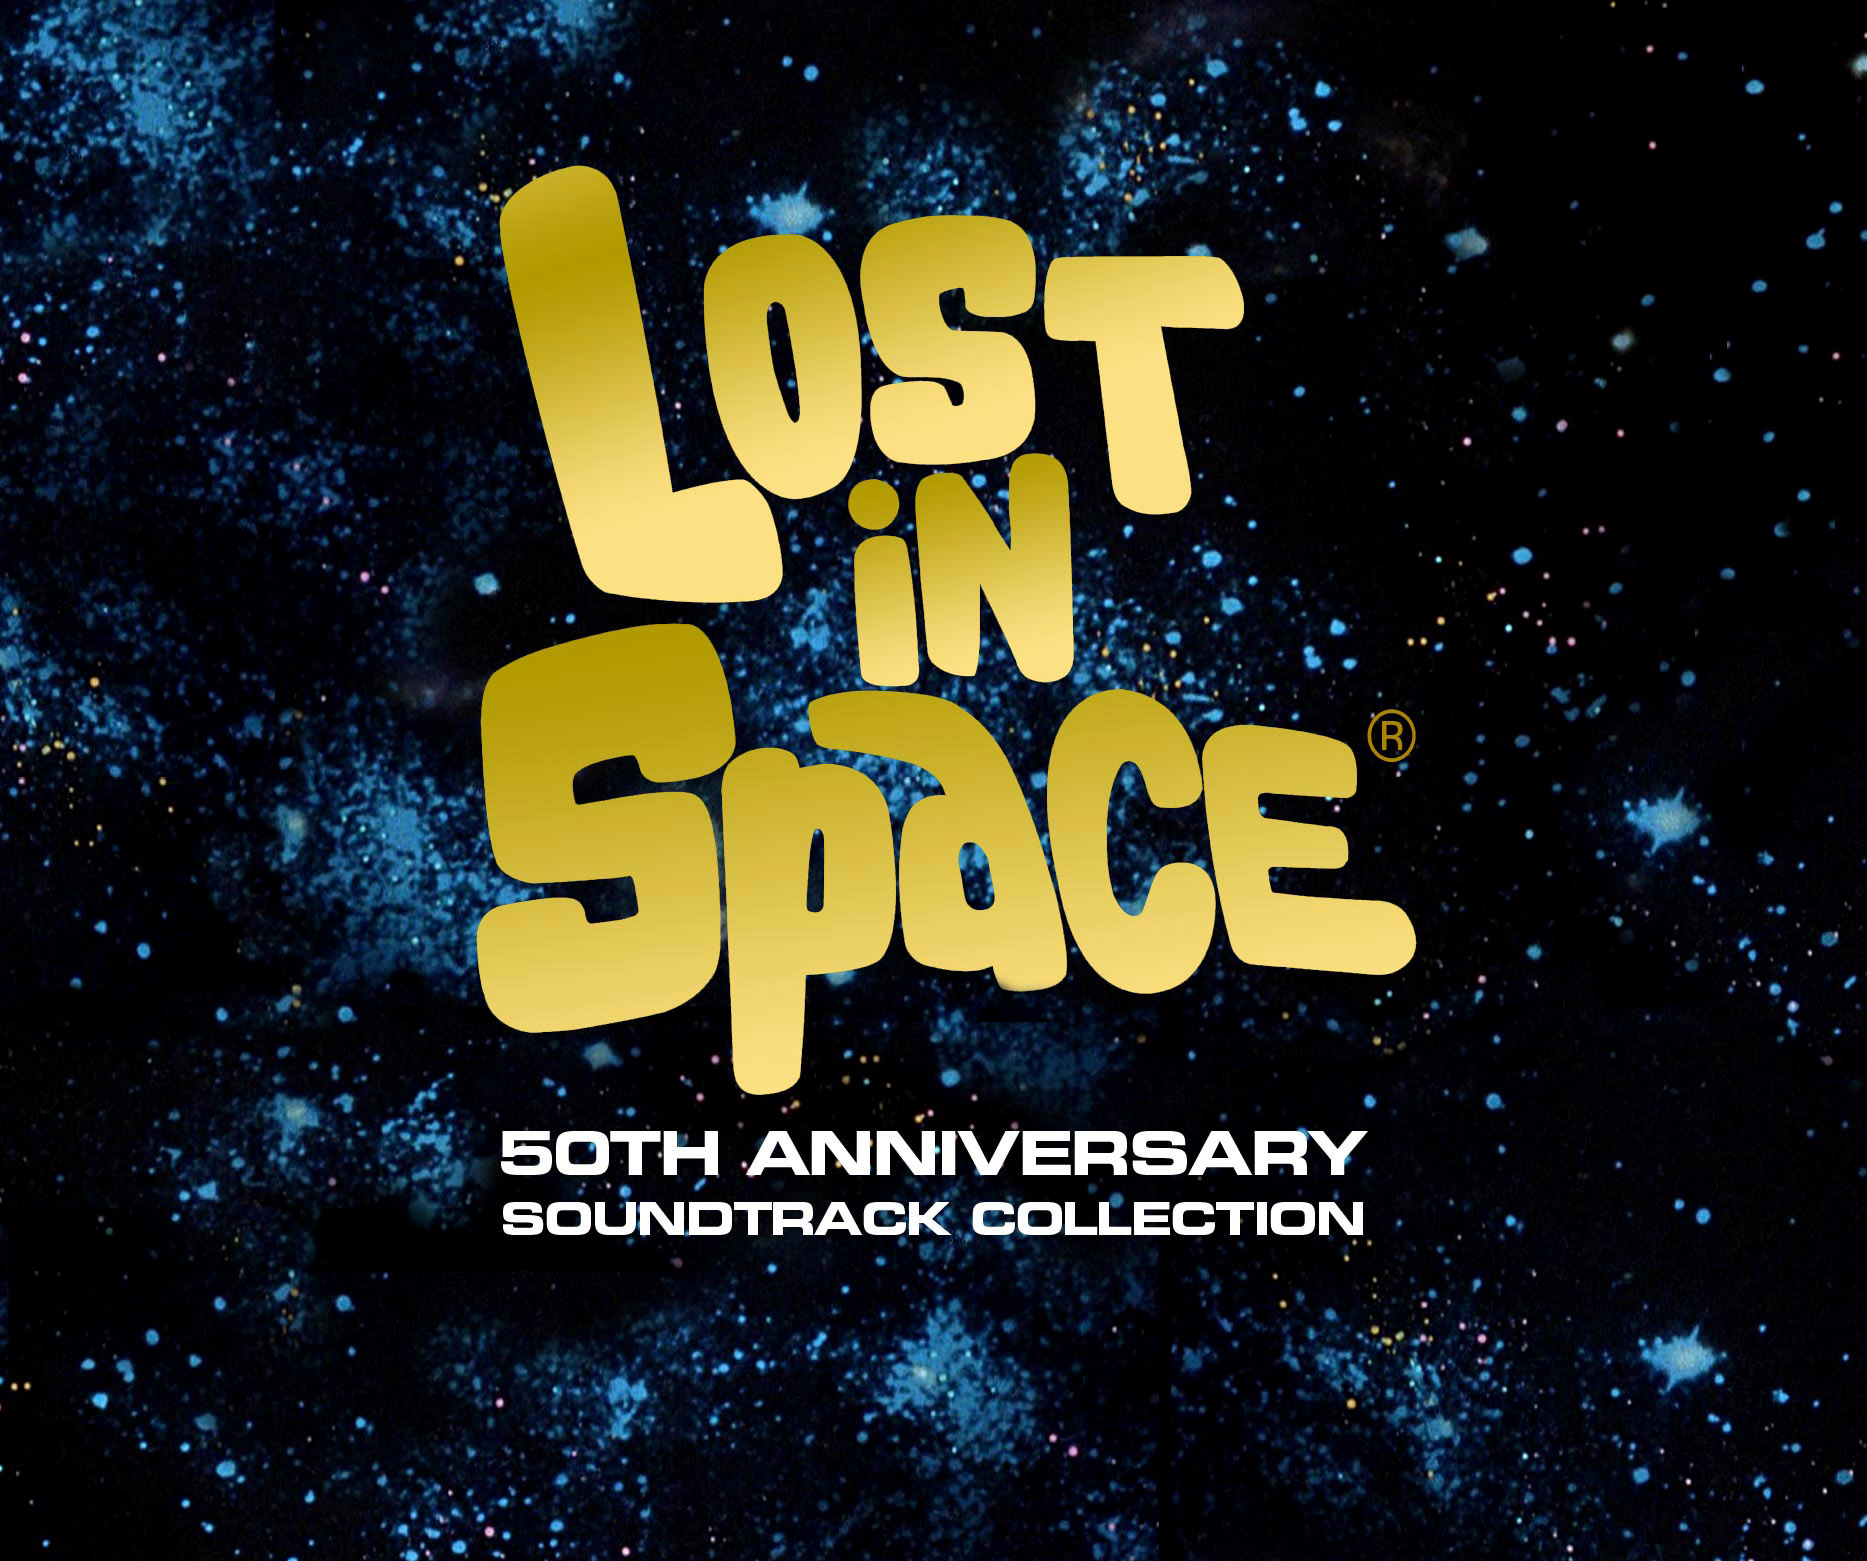 Шрифт Lost in Space. Lost in Space футболка коричневая. OST Collective. 50 In Space.